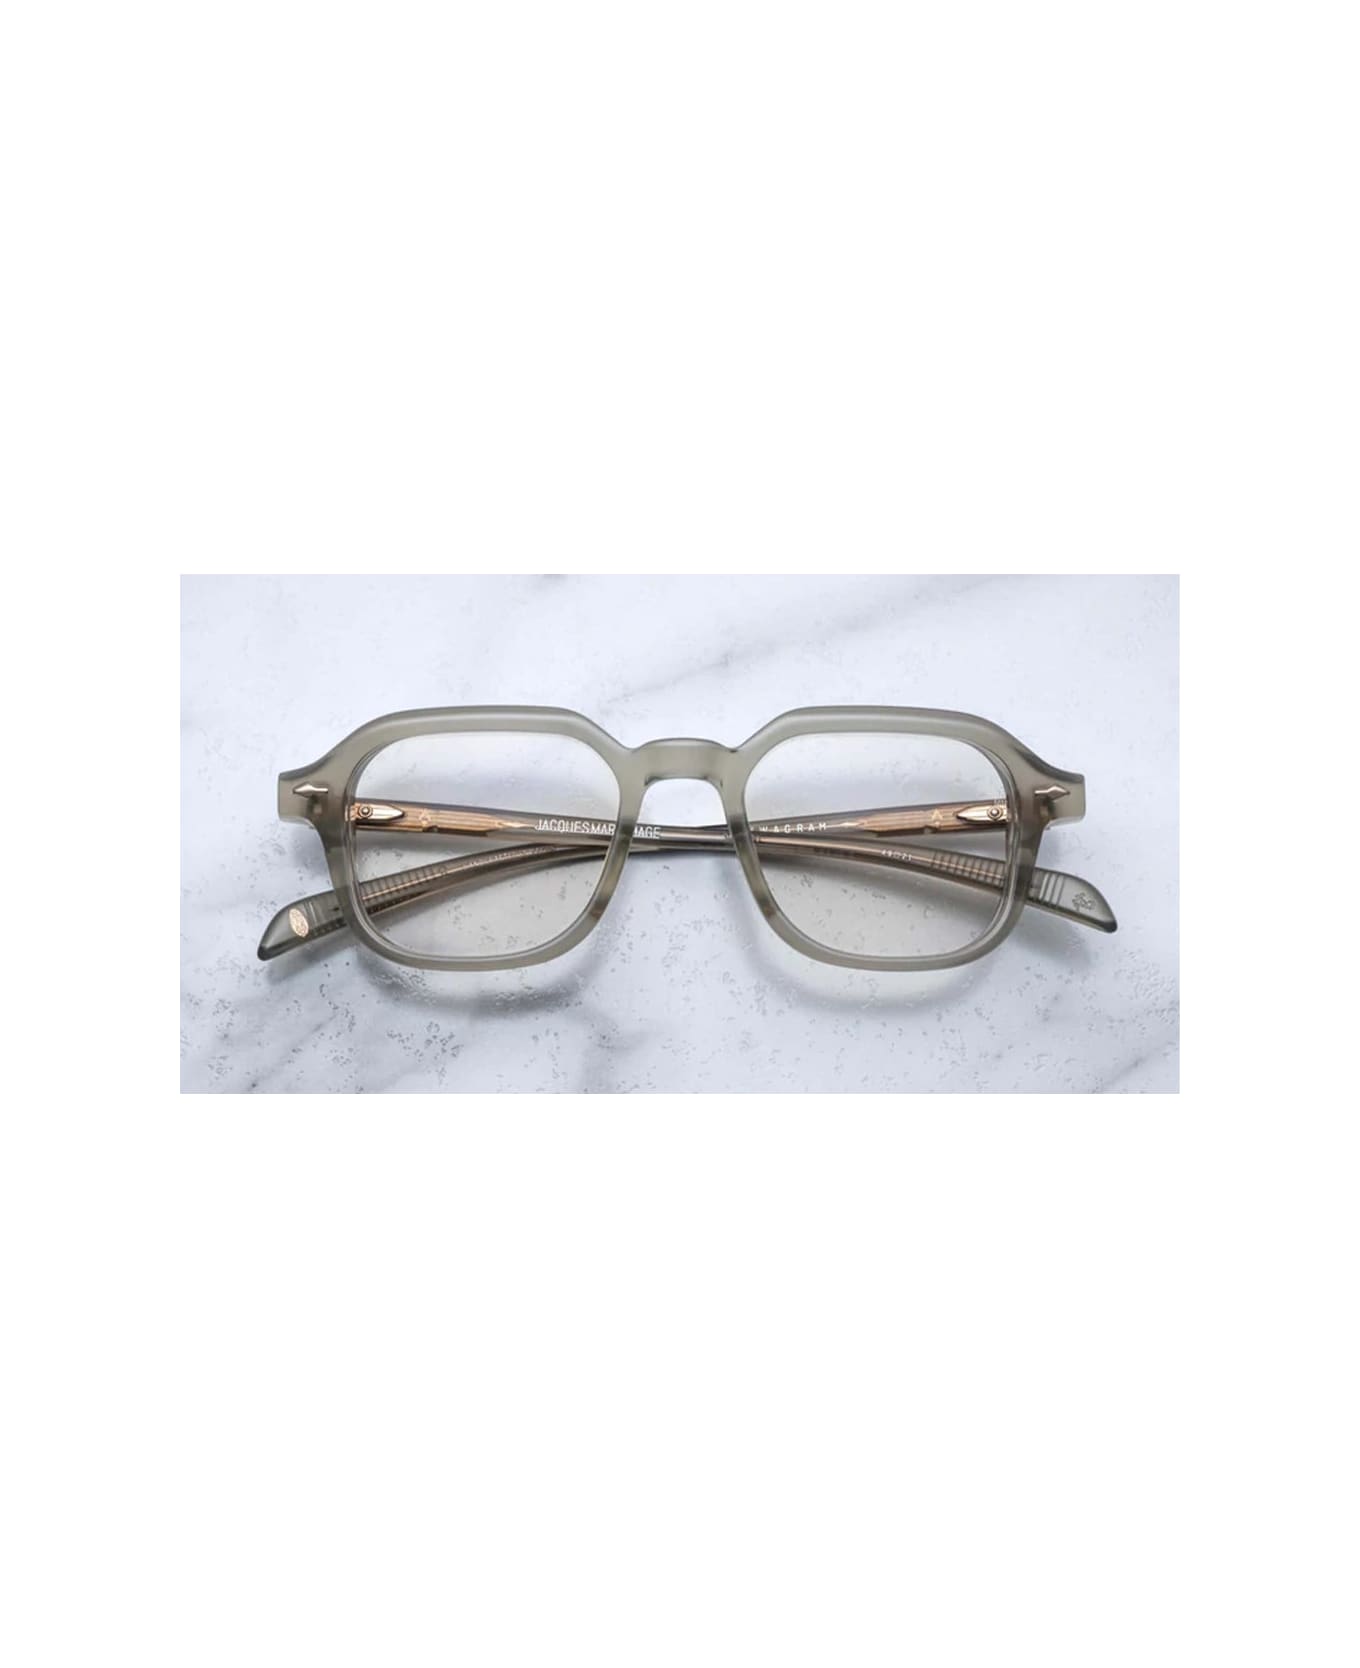 Jacques Marie Mage Wagram - Sky Grey Glasses - grey